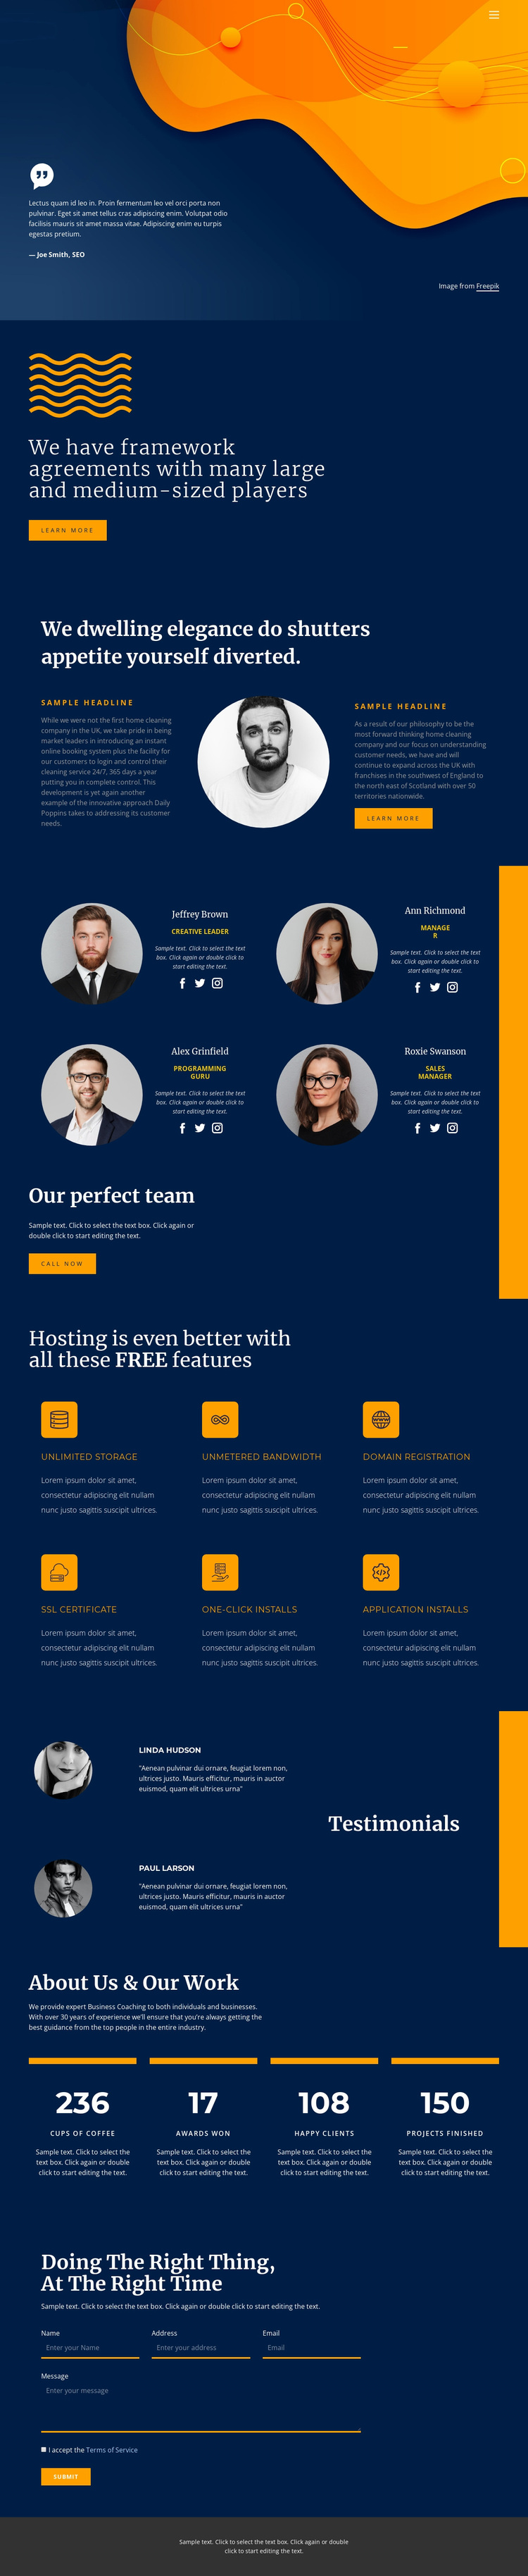 Quality, speed and result Website Design